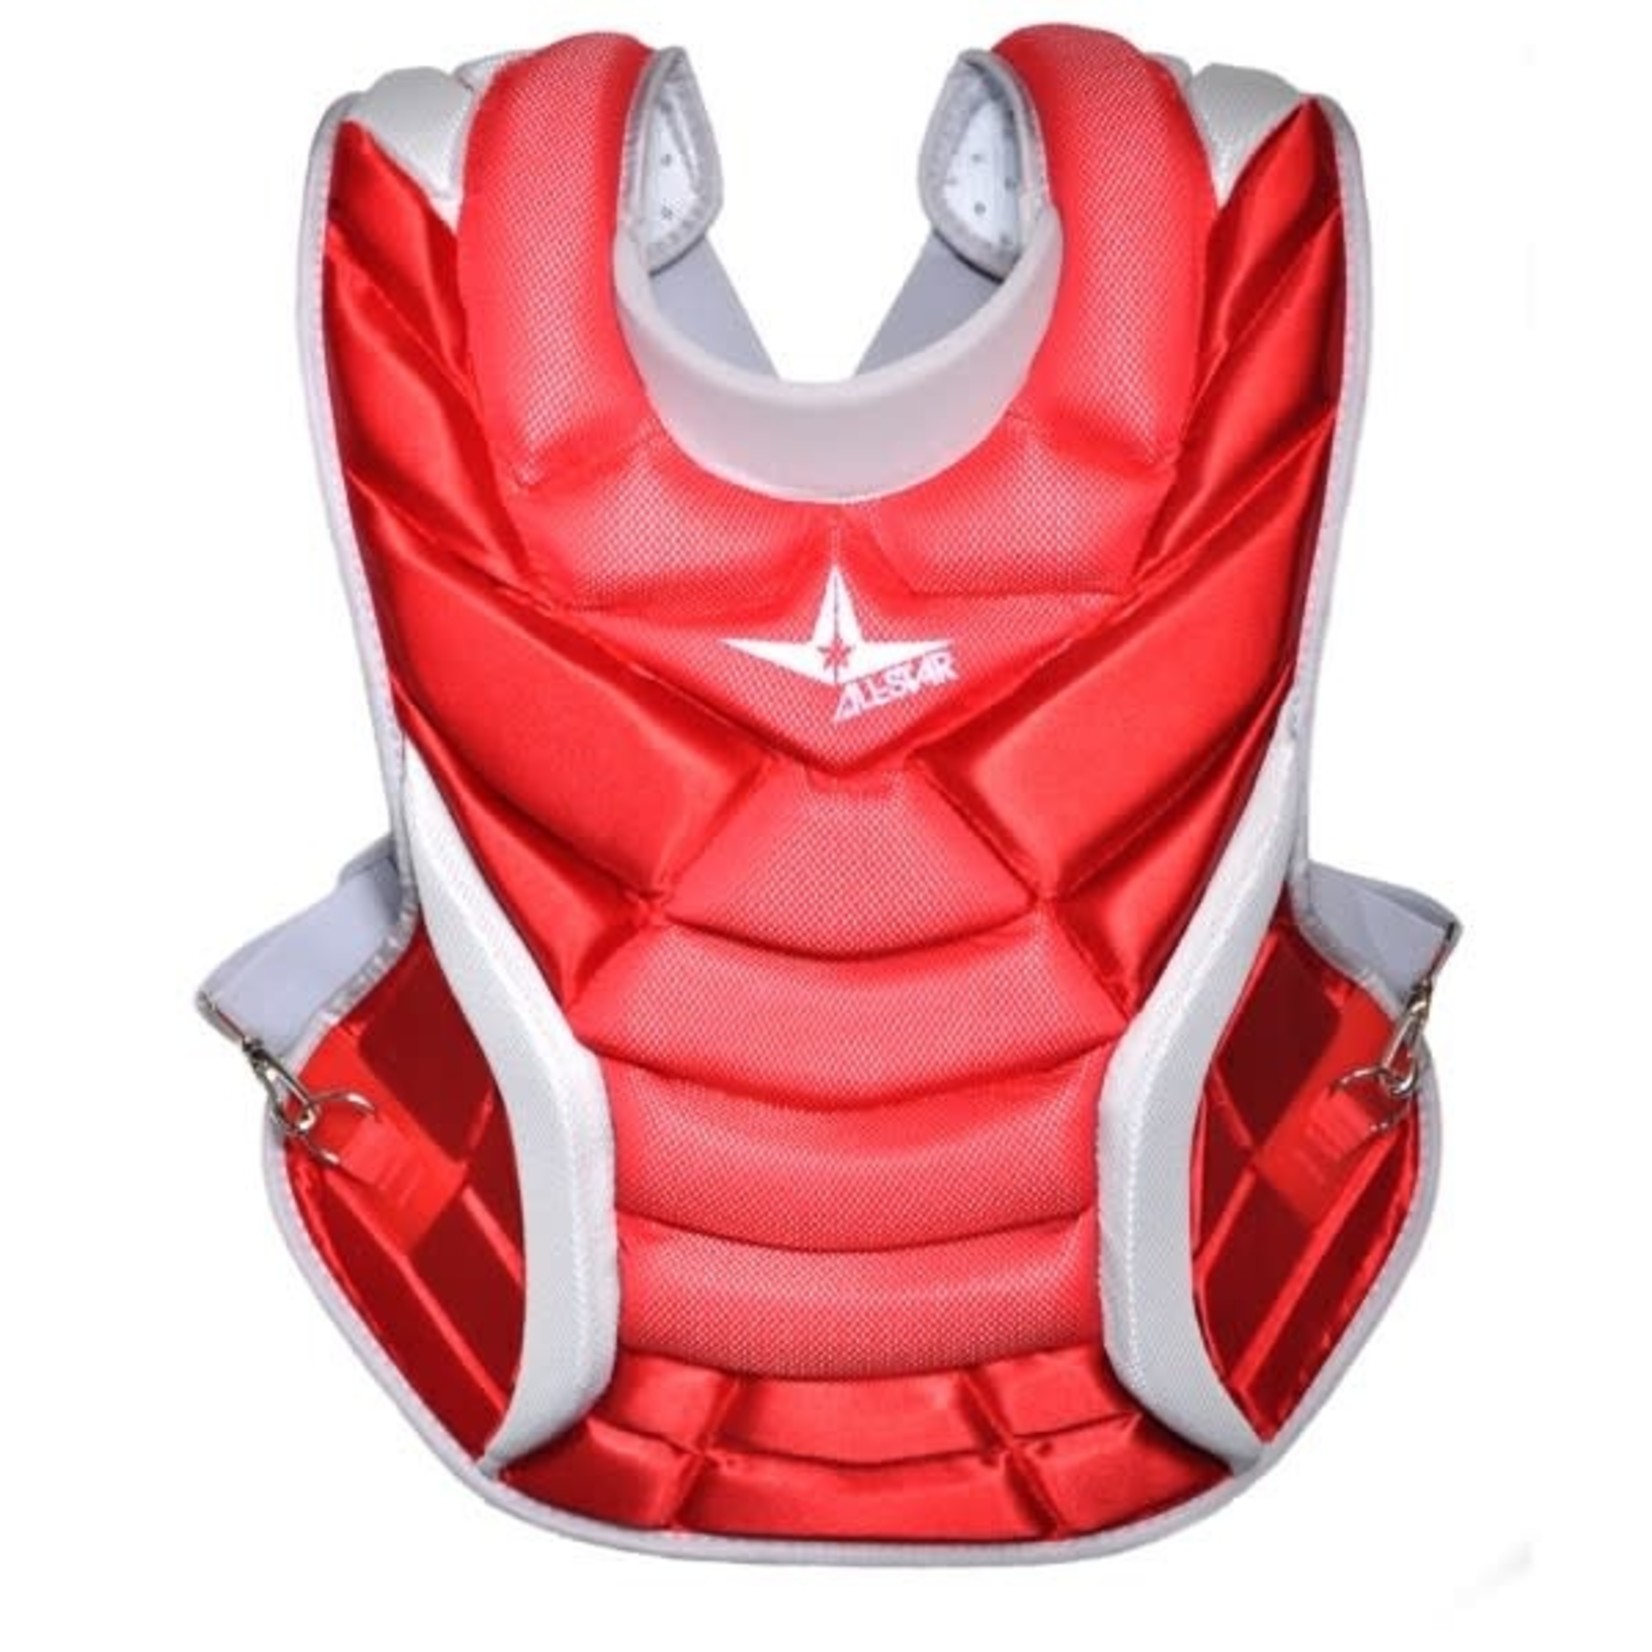 All Star All-star Vela Professional Fastpitch 14.5" Chest Protector